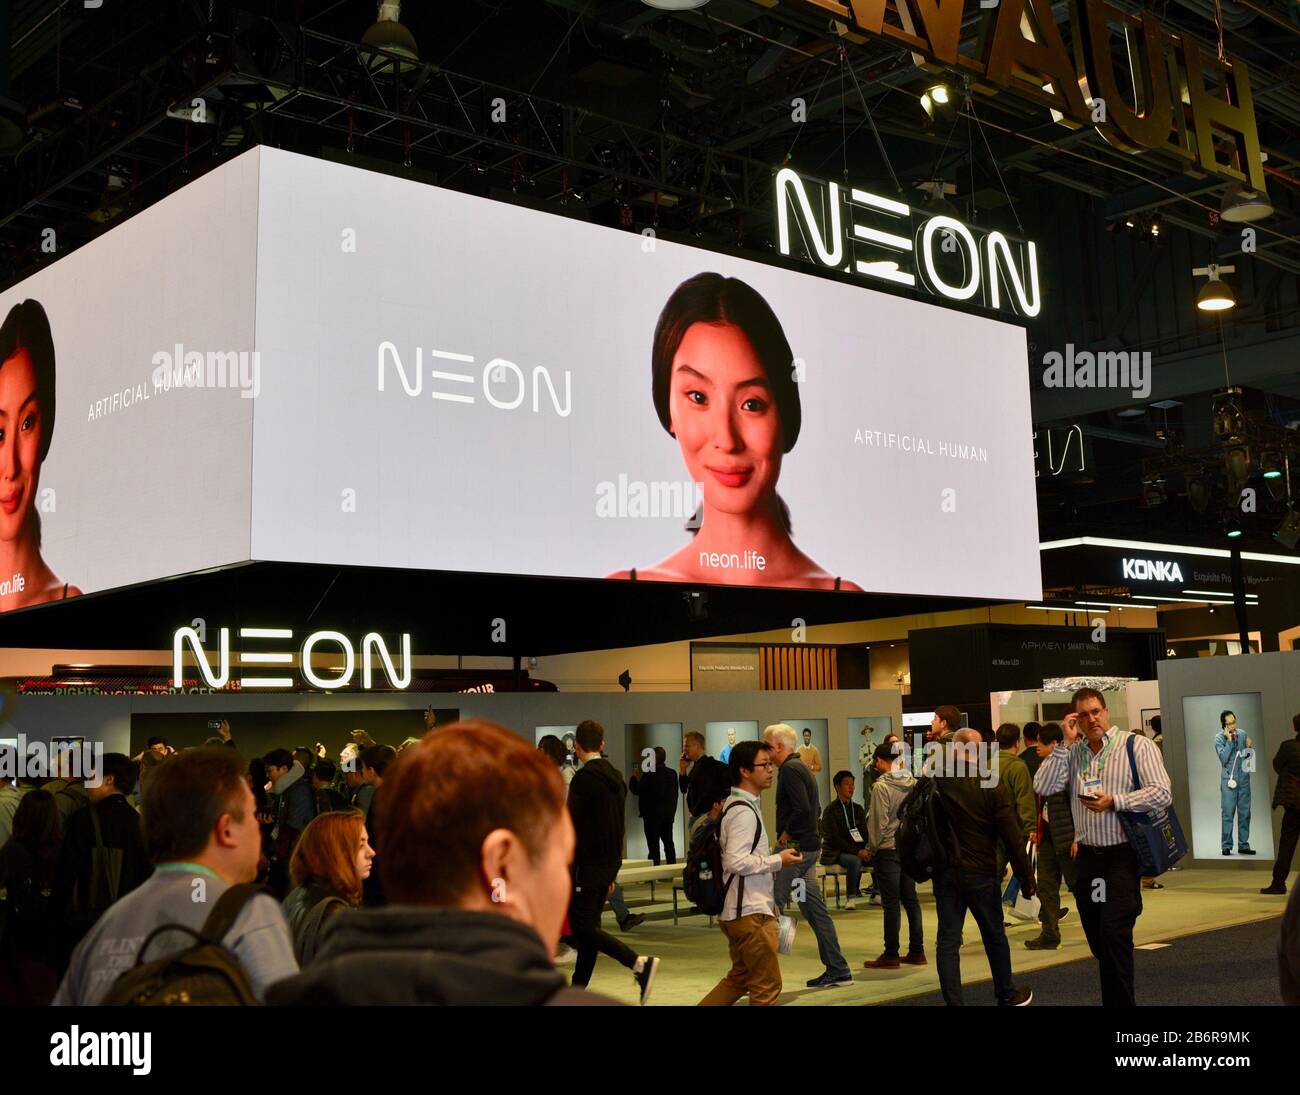 Samsung lab-funded, Star Labs, reveal Artificial Intelligence-powered (AI) lifeforms, a woman, on TV monitor screens at CES, Las Vegas, NV, USA Stock Photo